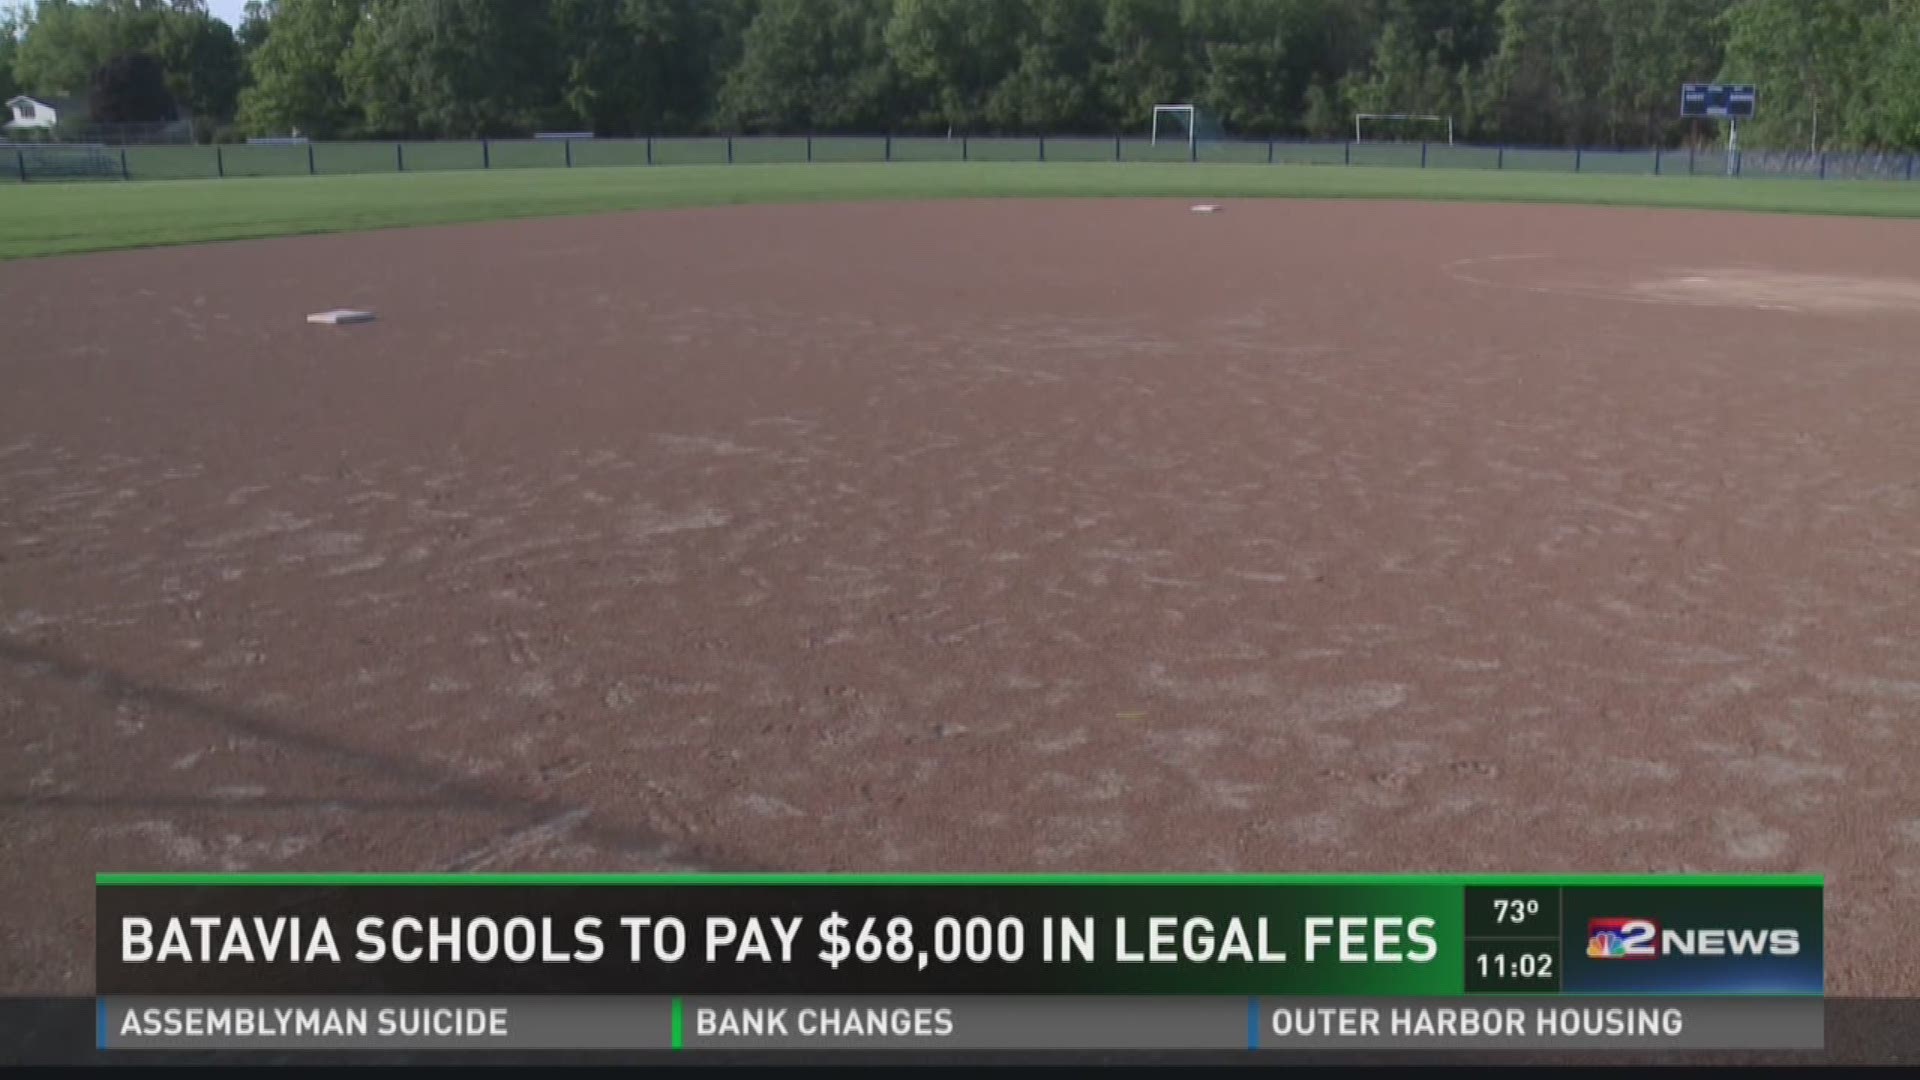 Batavia Schools To Pay $68,000 In Legal Fees